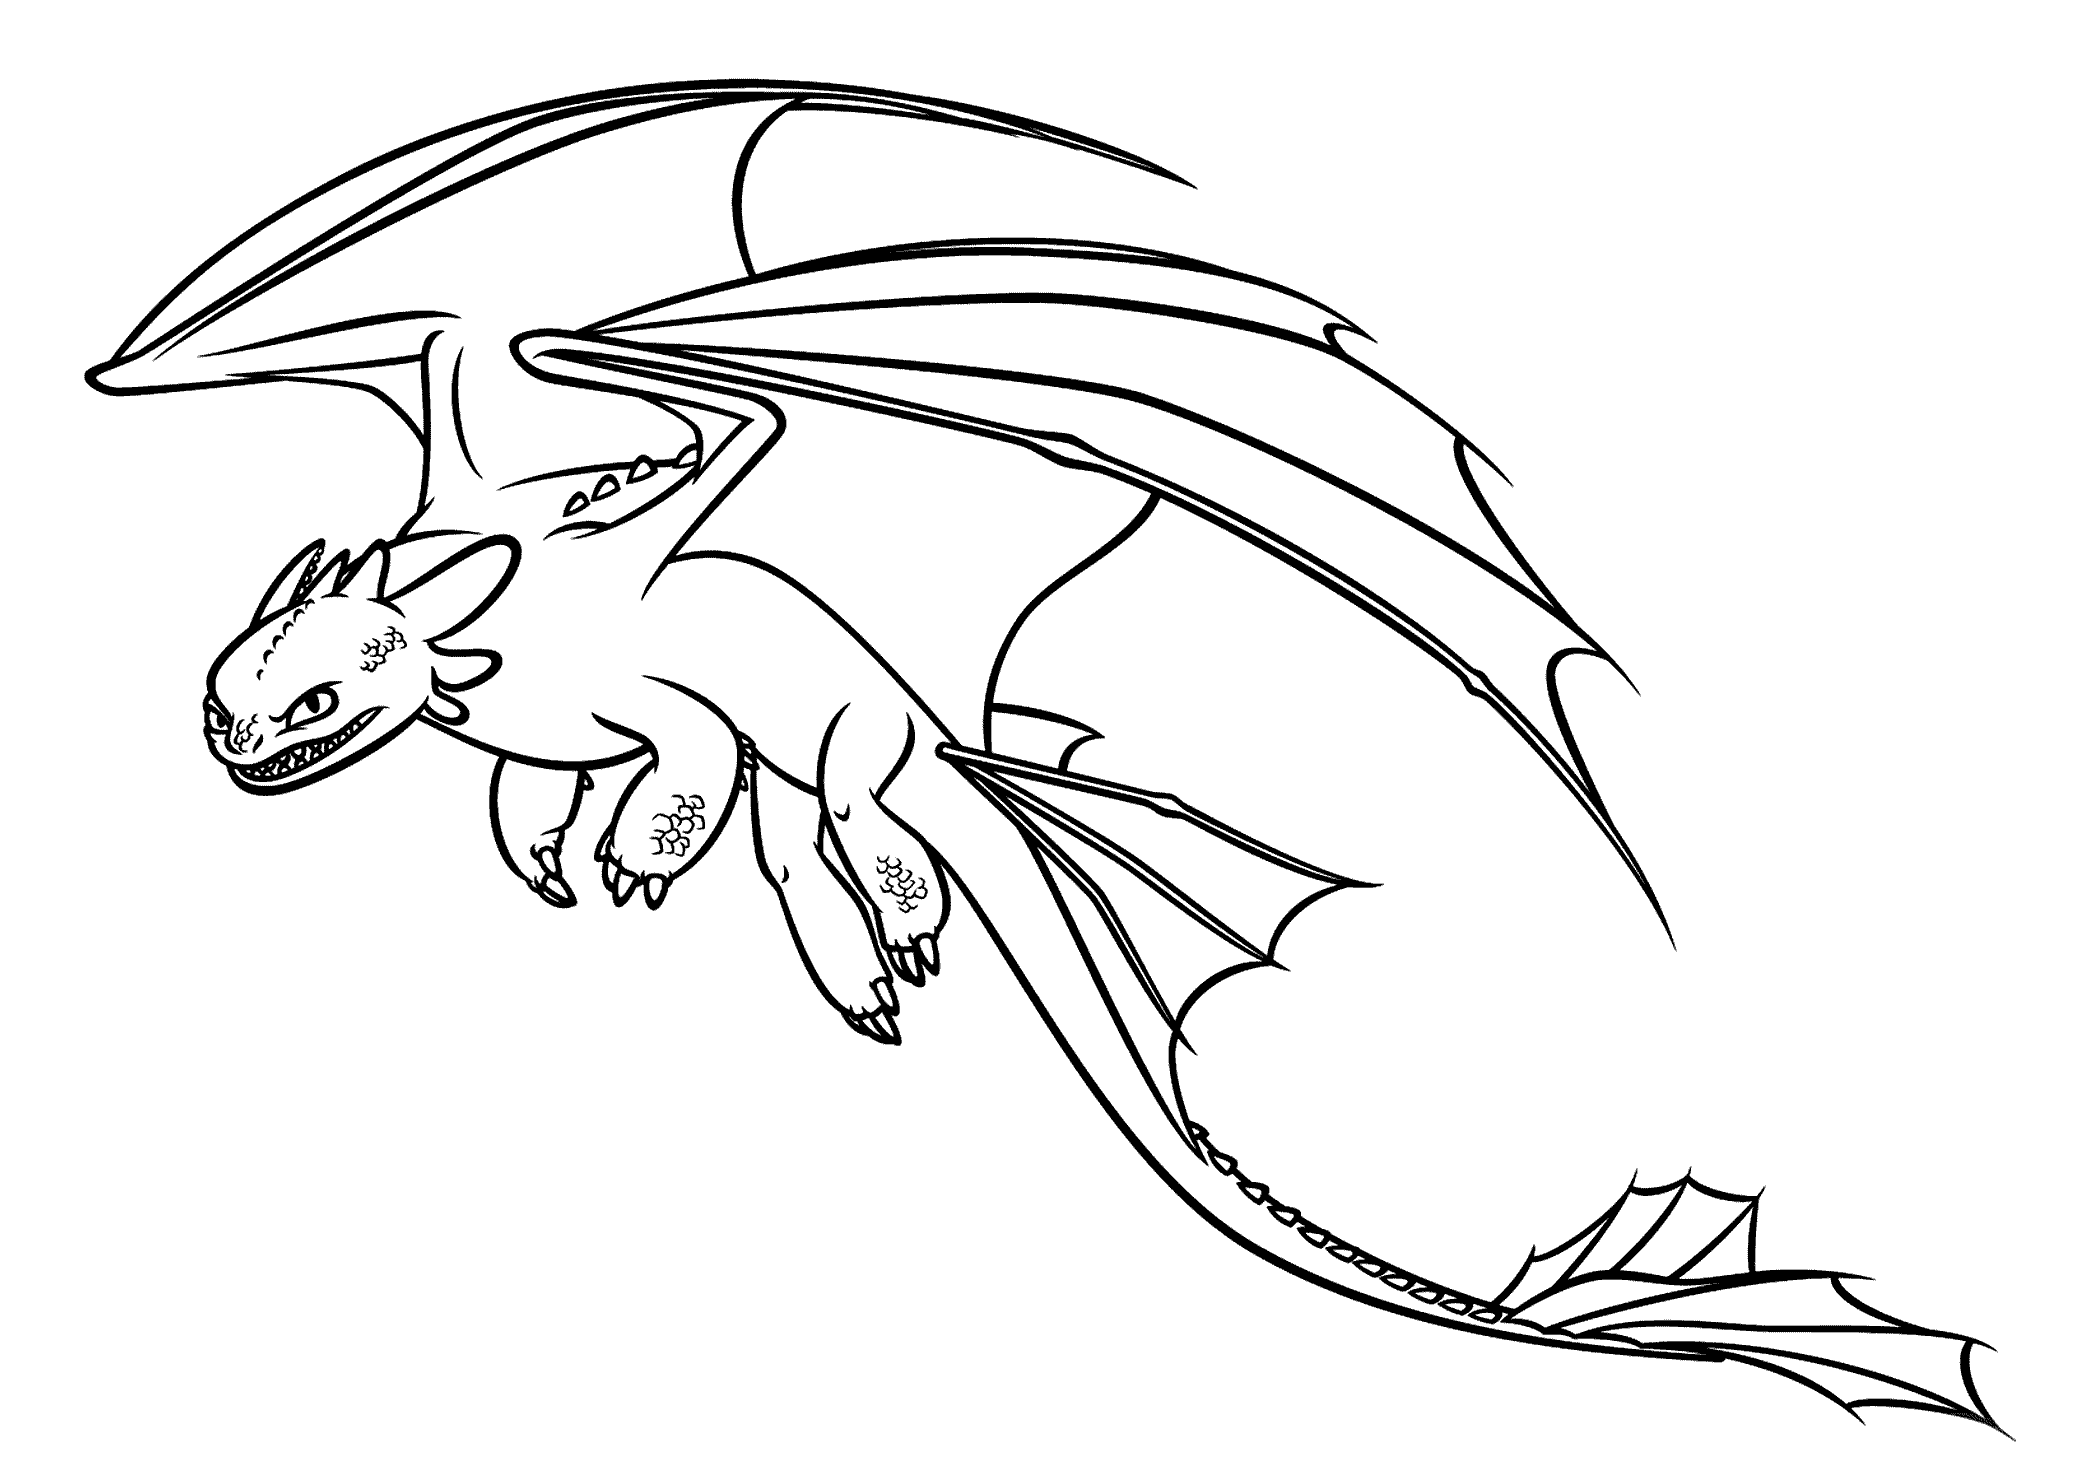 printable coloring pages dragons dragon coloring pages to download and print for free pages dragons printable coloring 